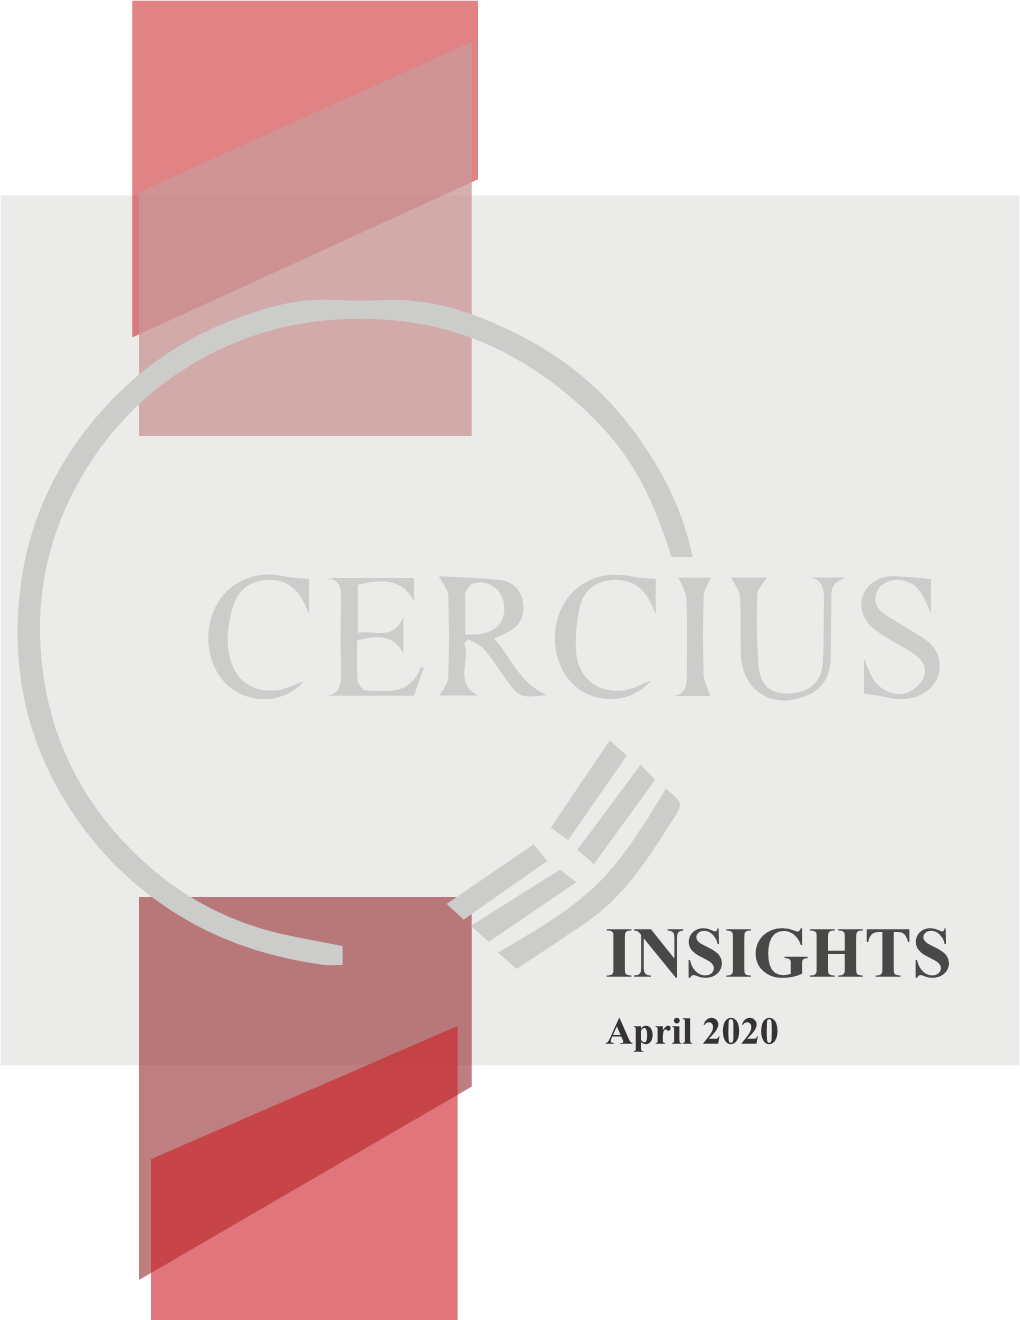 INSIGHTS April 2020 Cercius Group - Insights Notes